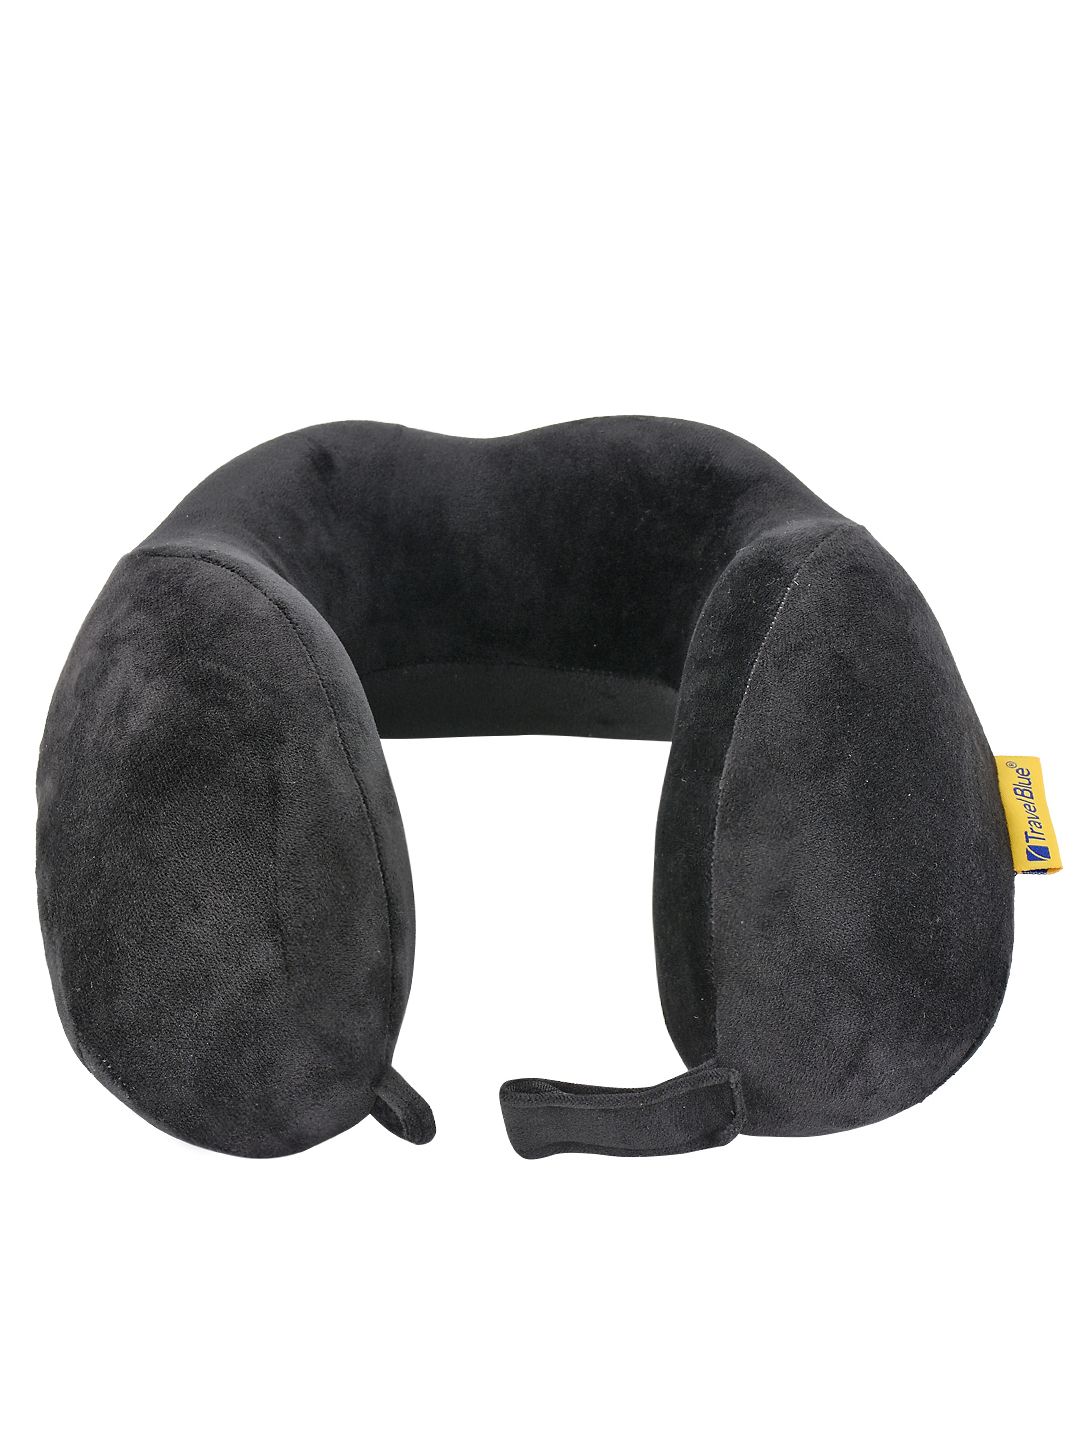 Travel Blue Black Solid Memory Foam Foldable Tranquility Travel Neck Pillow Price in India